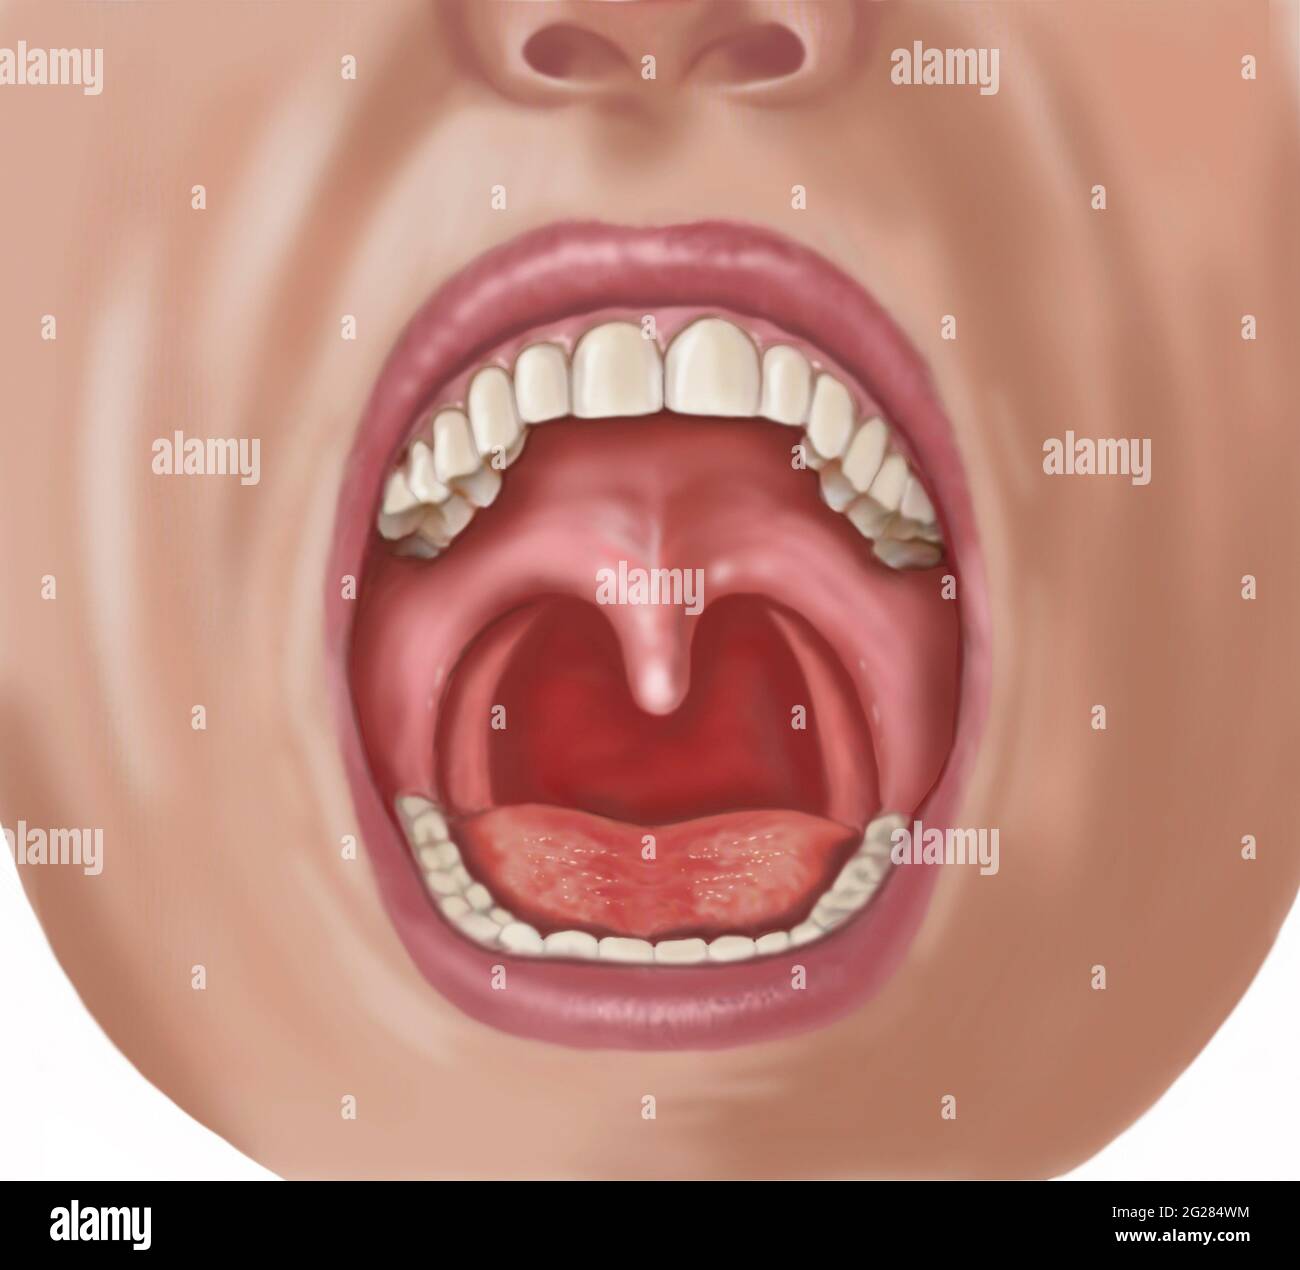 Looking into open mouth showing uvula, teeth, tongue and pharynx. Stock Photo